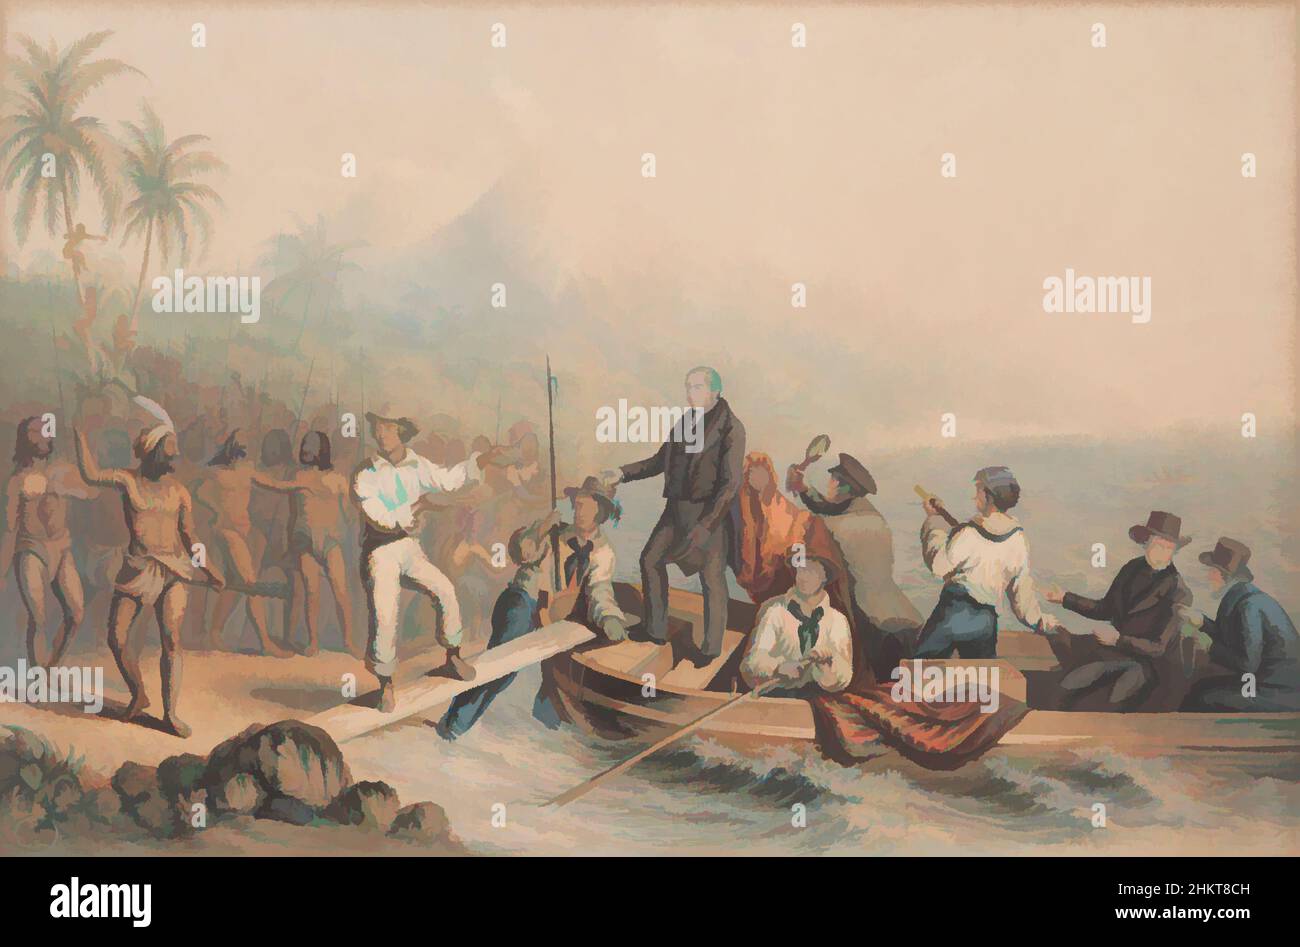 Art inspired by The reception of the Rev. J. Williams at Tanna in the South Seas, the day before he was massacred, George Baxter, artist, 1841, England, Classic works modernized by Artotop with a splash of modernity. Shapes, color and value, eye-catching visual impact on art. Emotions through freedom of artworks in a contemporary way. A timeless message pursuing a wildly creative new direction. Artists turning to the digital medium and creating the Artotop NFT Stock Photo